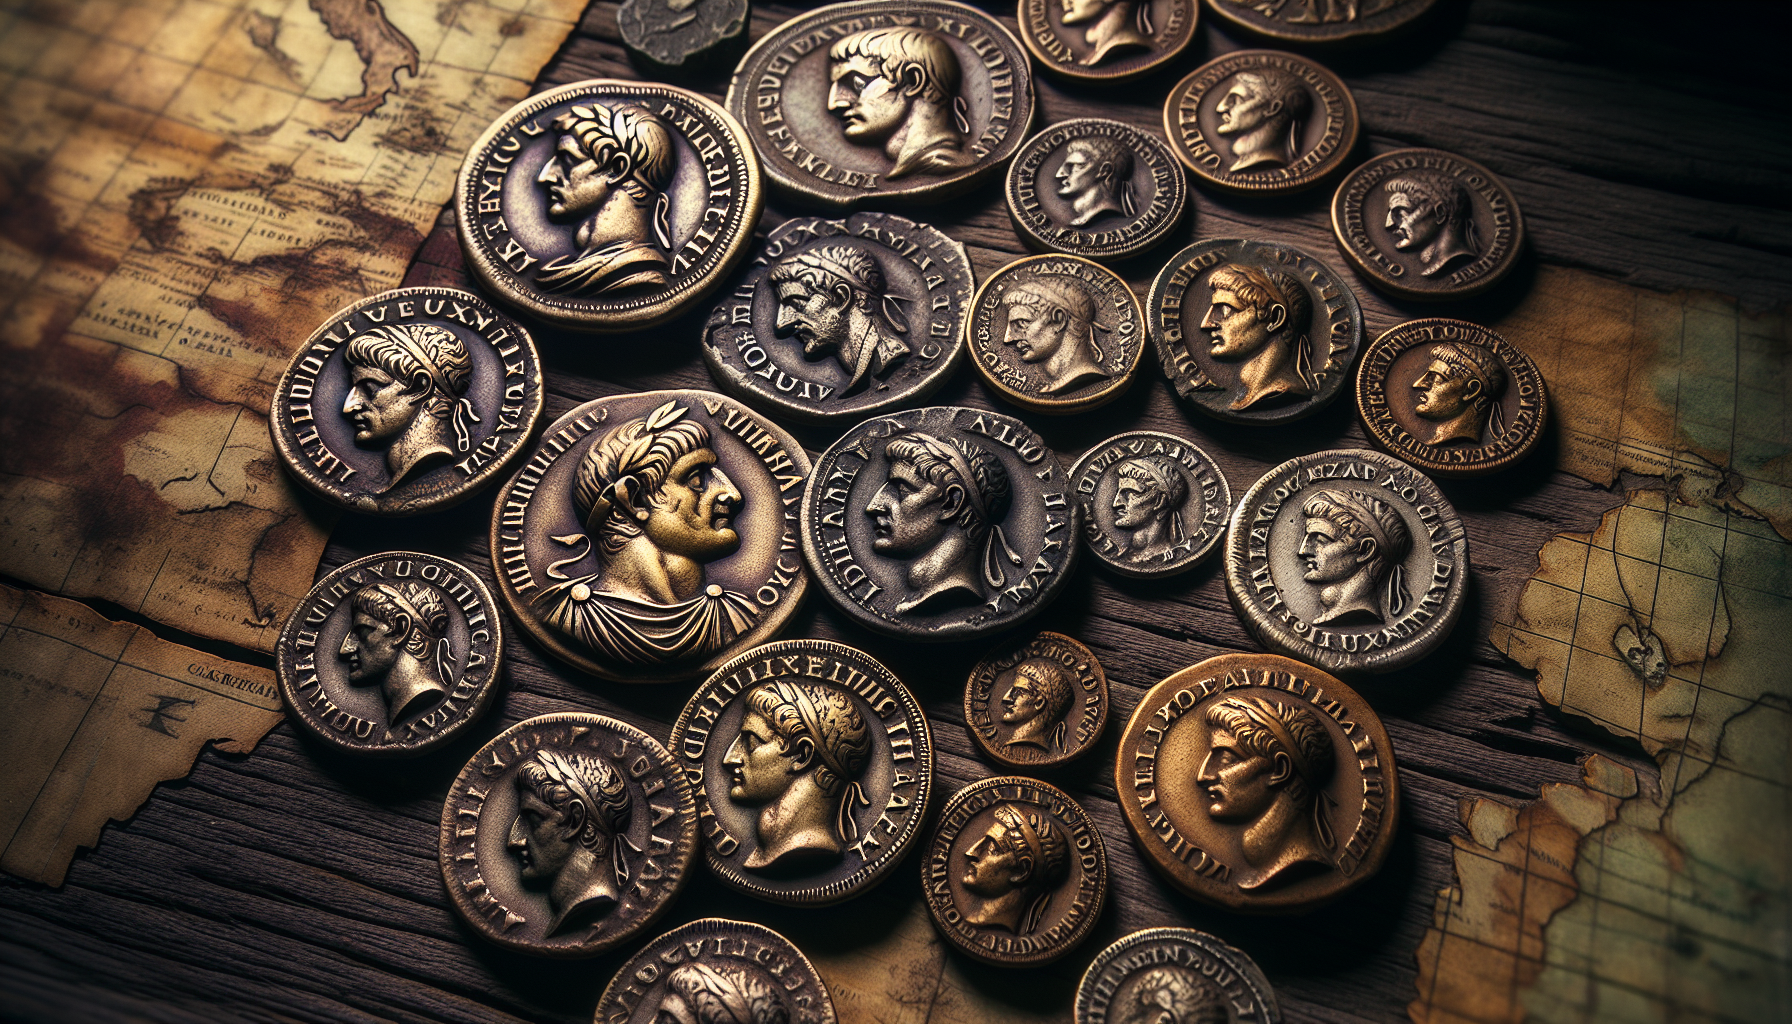 Ancient coins from the Twelve Caesars collection